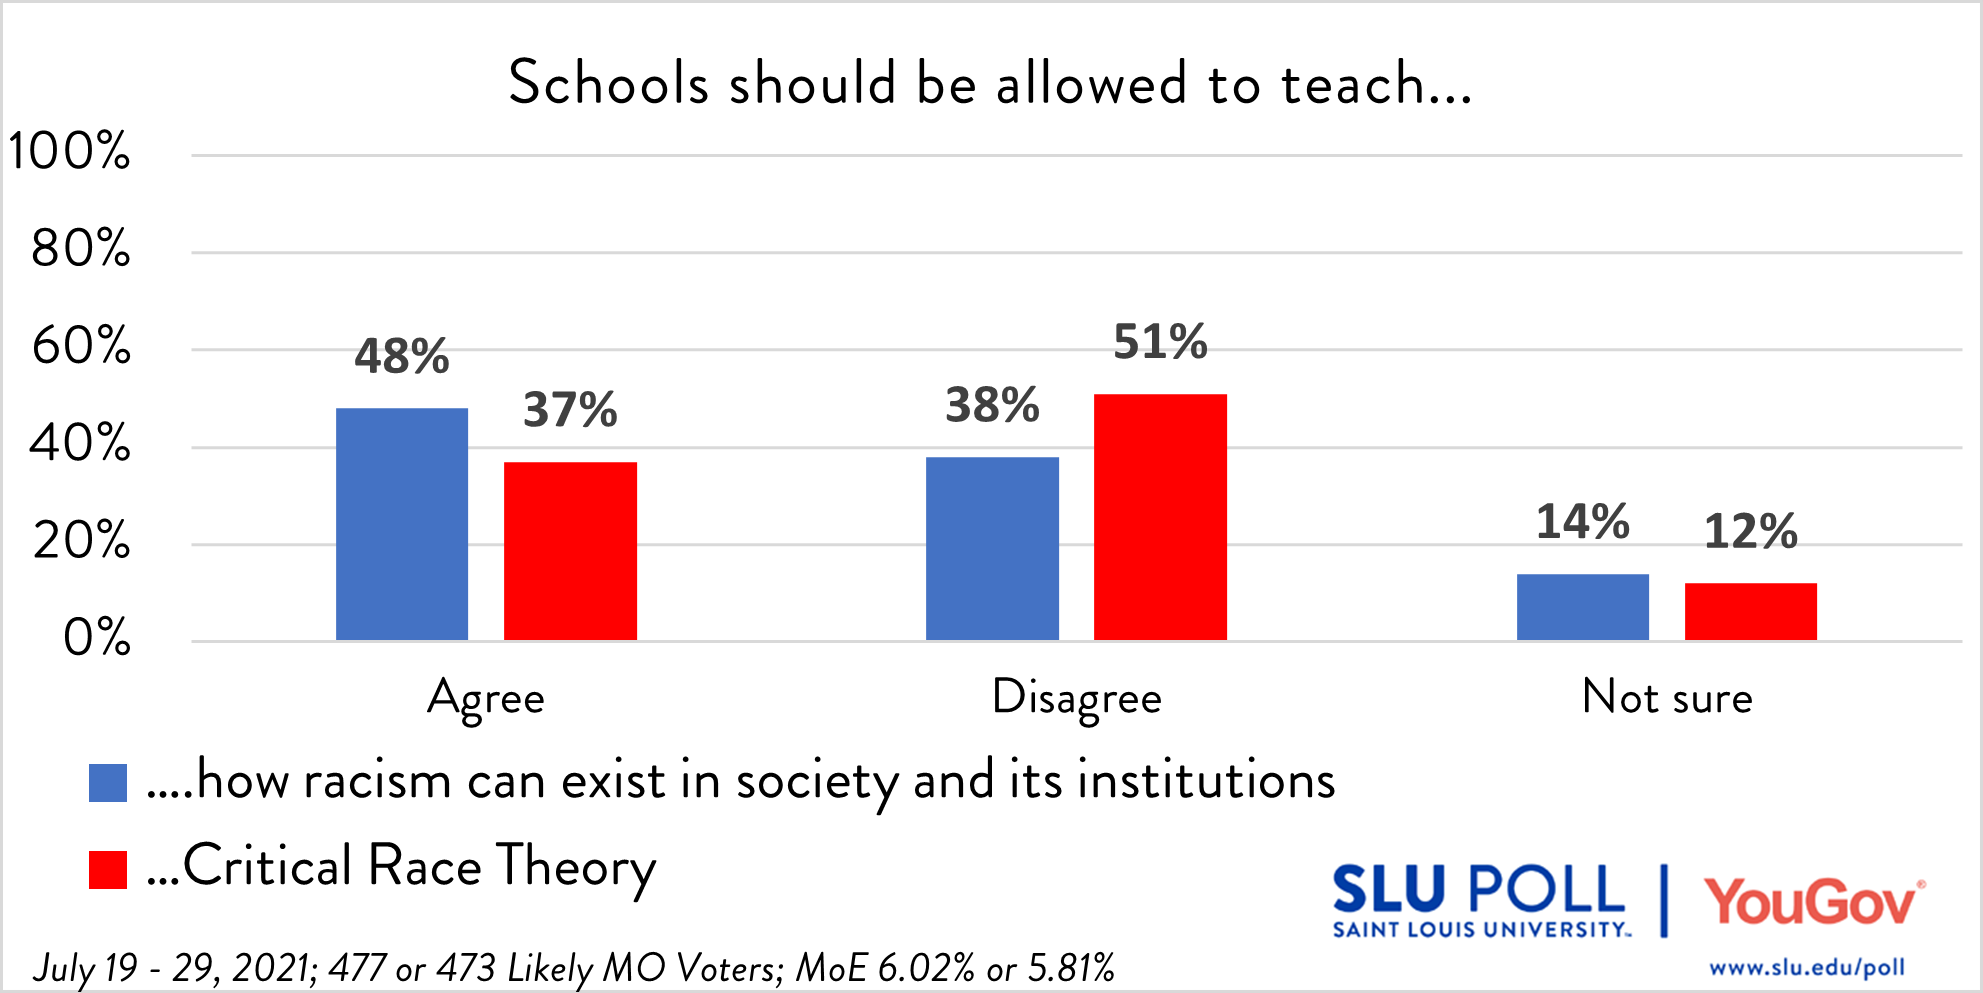 Do you agree or disagree with the following statements…Schools should be allowed to teach about how racism can exist in society and its institutions? - Agree: 48% - Disagree: 38% - Not sure: 14% Subsample Question: The sample size for this question is 477. The margin of error for the full results for the above question is ± 6.02%.  EDU004 Do you agree or disagree with the following statements…Schools should be allowed to teach Critical Race Theory? - Agree: 37% - Disagree: 51% - Not sure: 12% Subsample Question: The sample size for this question is 473. The margin of error for the full results for the above question is ± 5.81%.